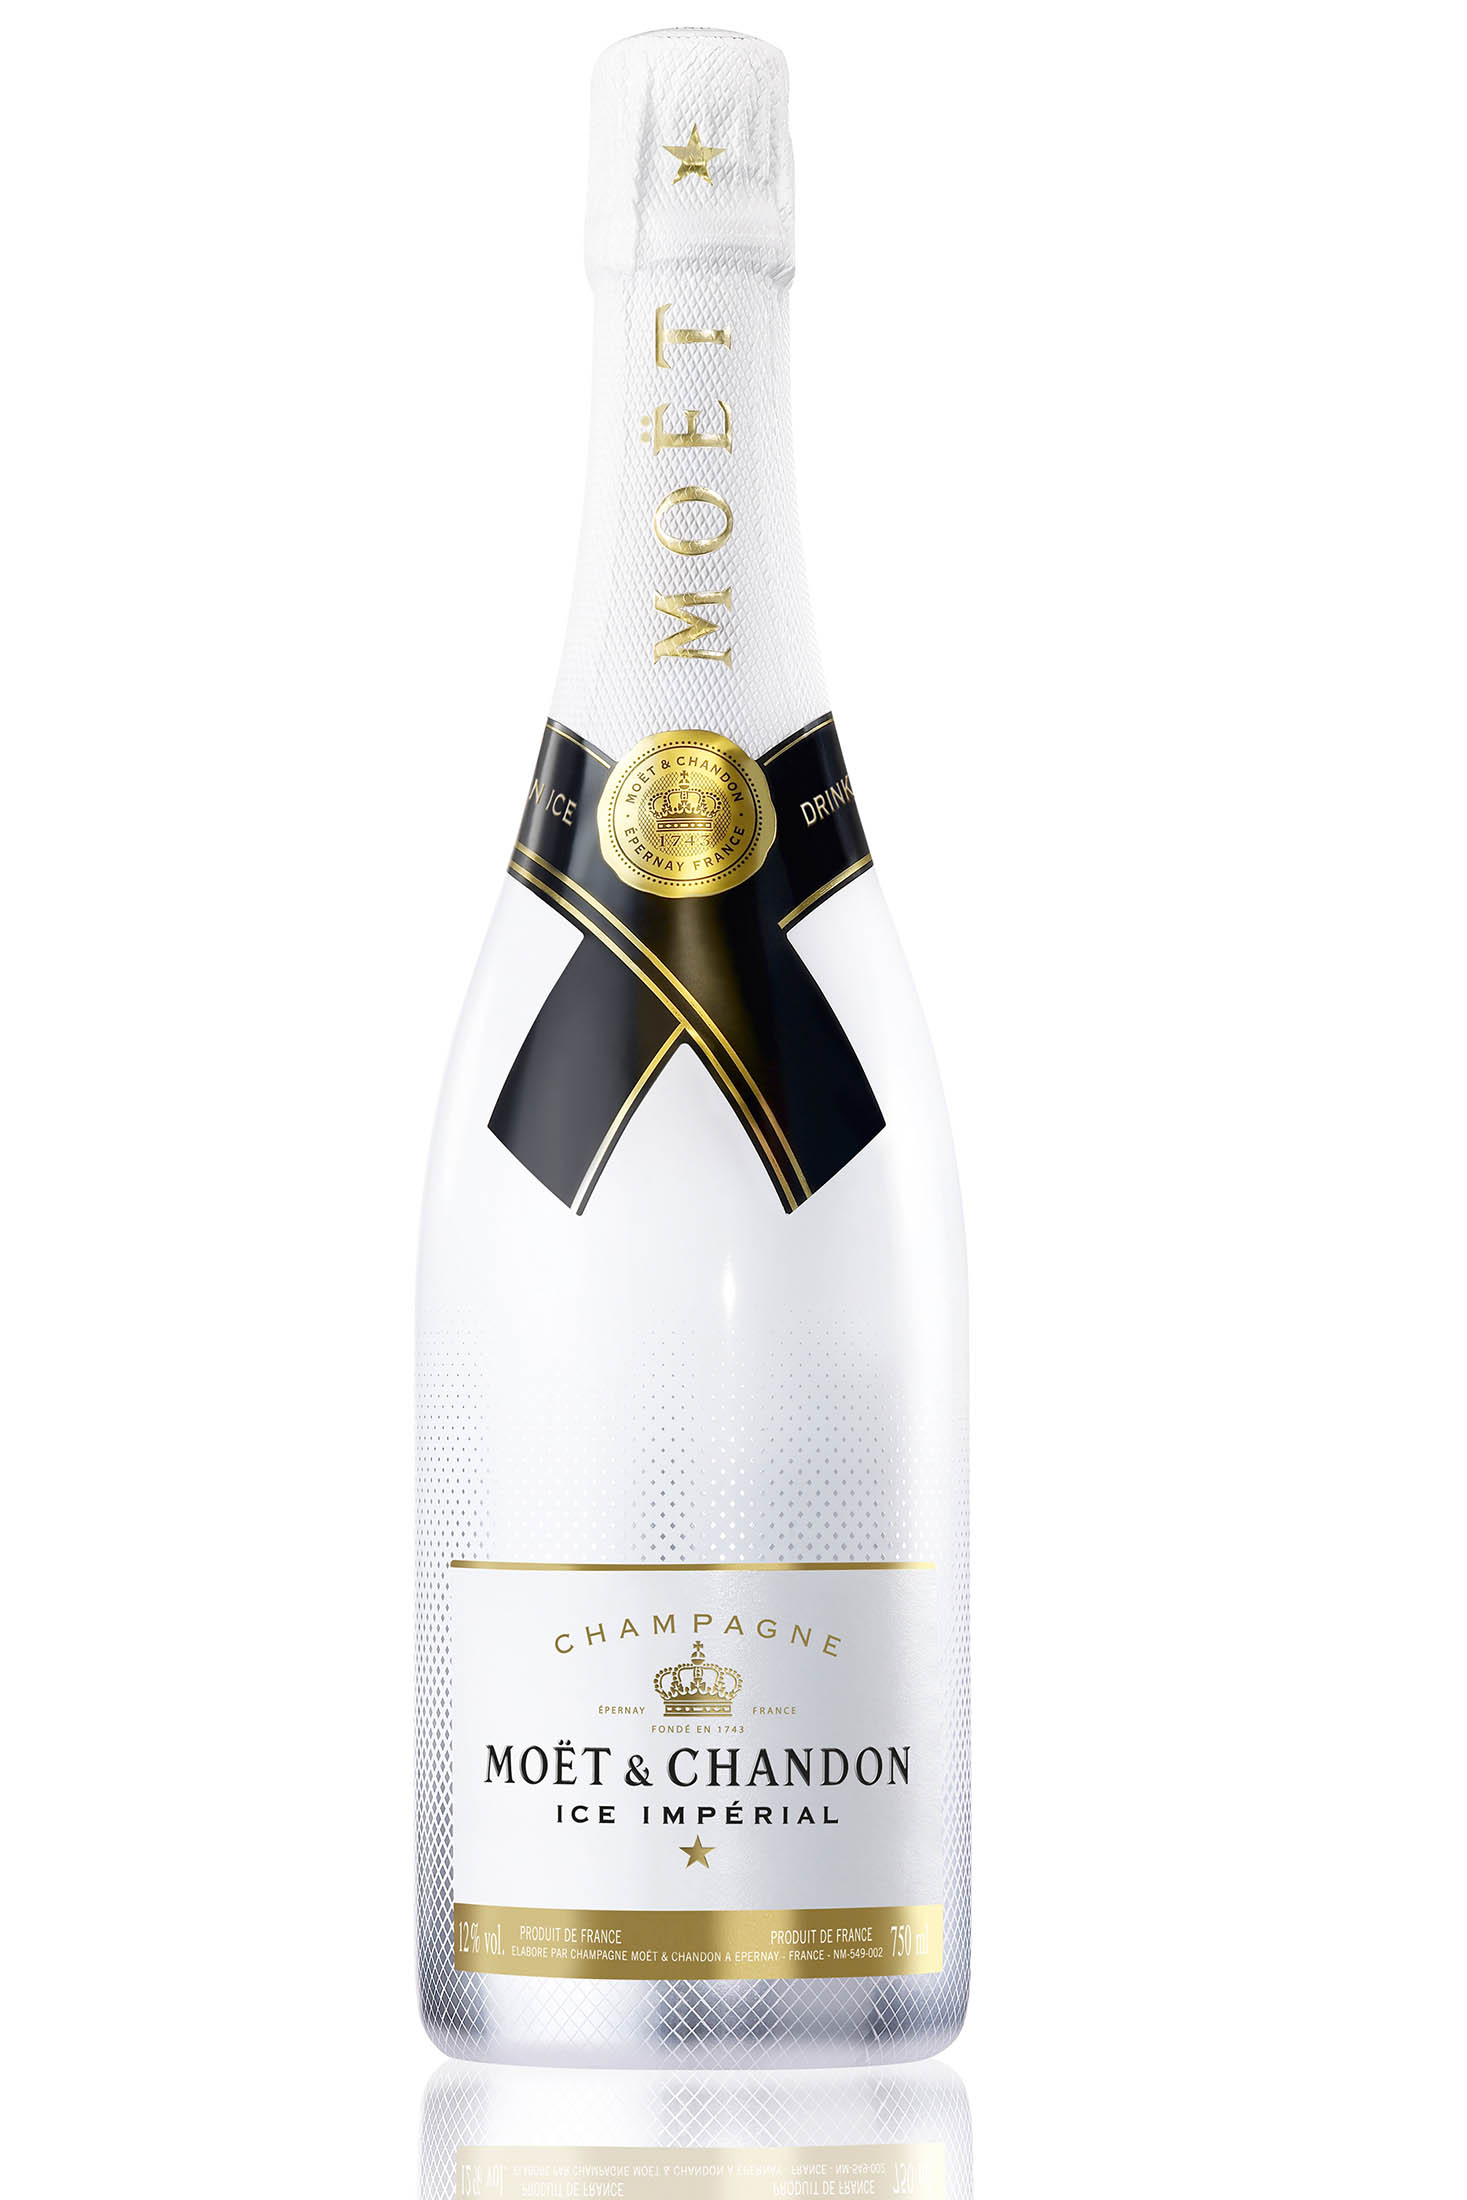 Champagne House Moet and Chandon in Epernay Editorial Photo